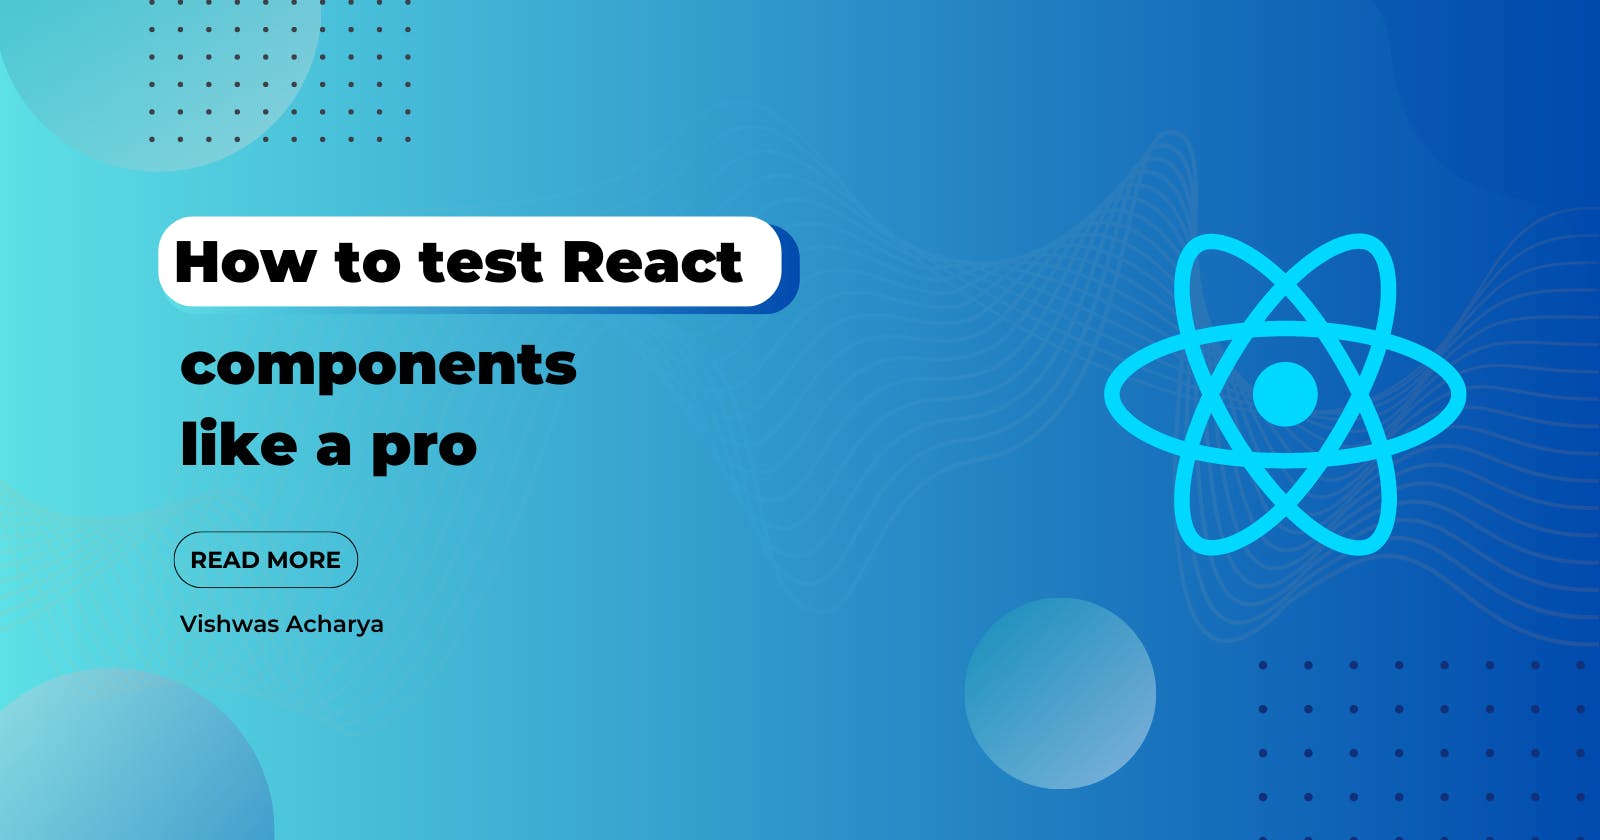 How to test your React components like a pro